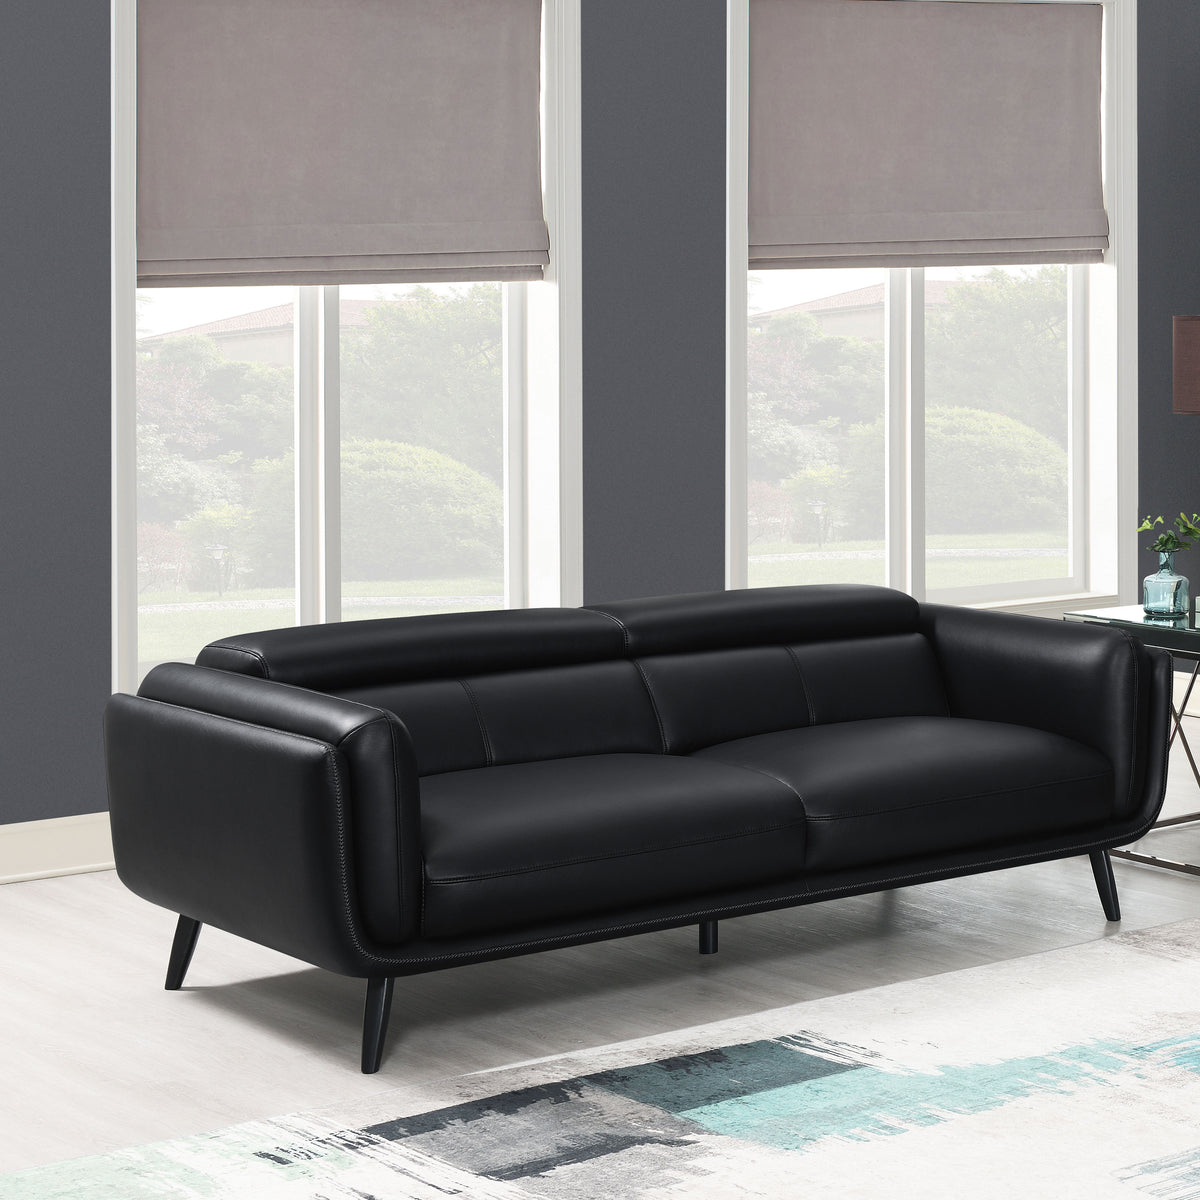 Shania Track Arms Sofa with Tapered Legs Black  Las Vegas Furniture Stores